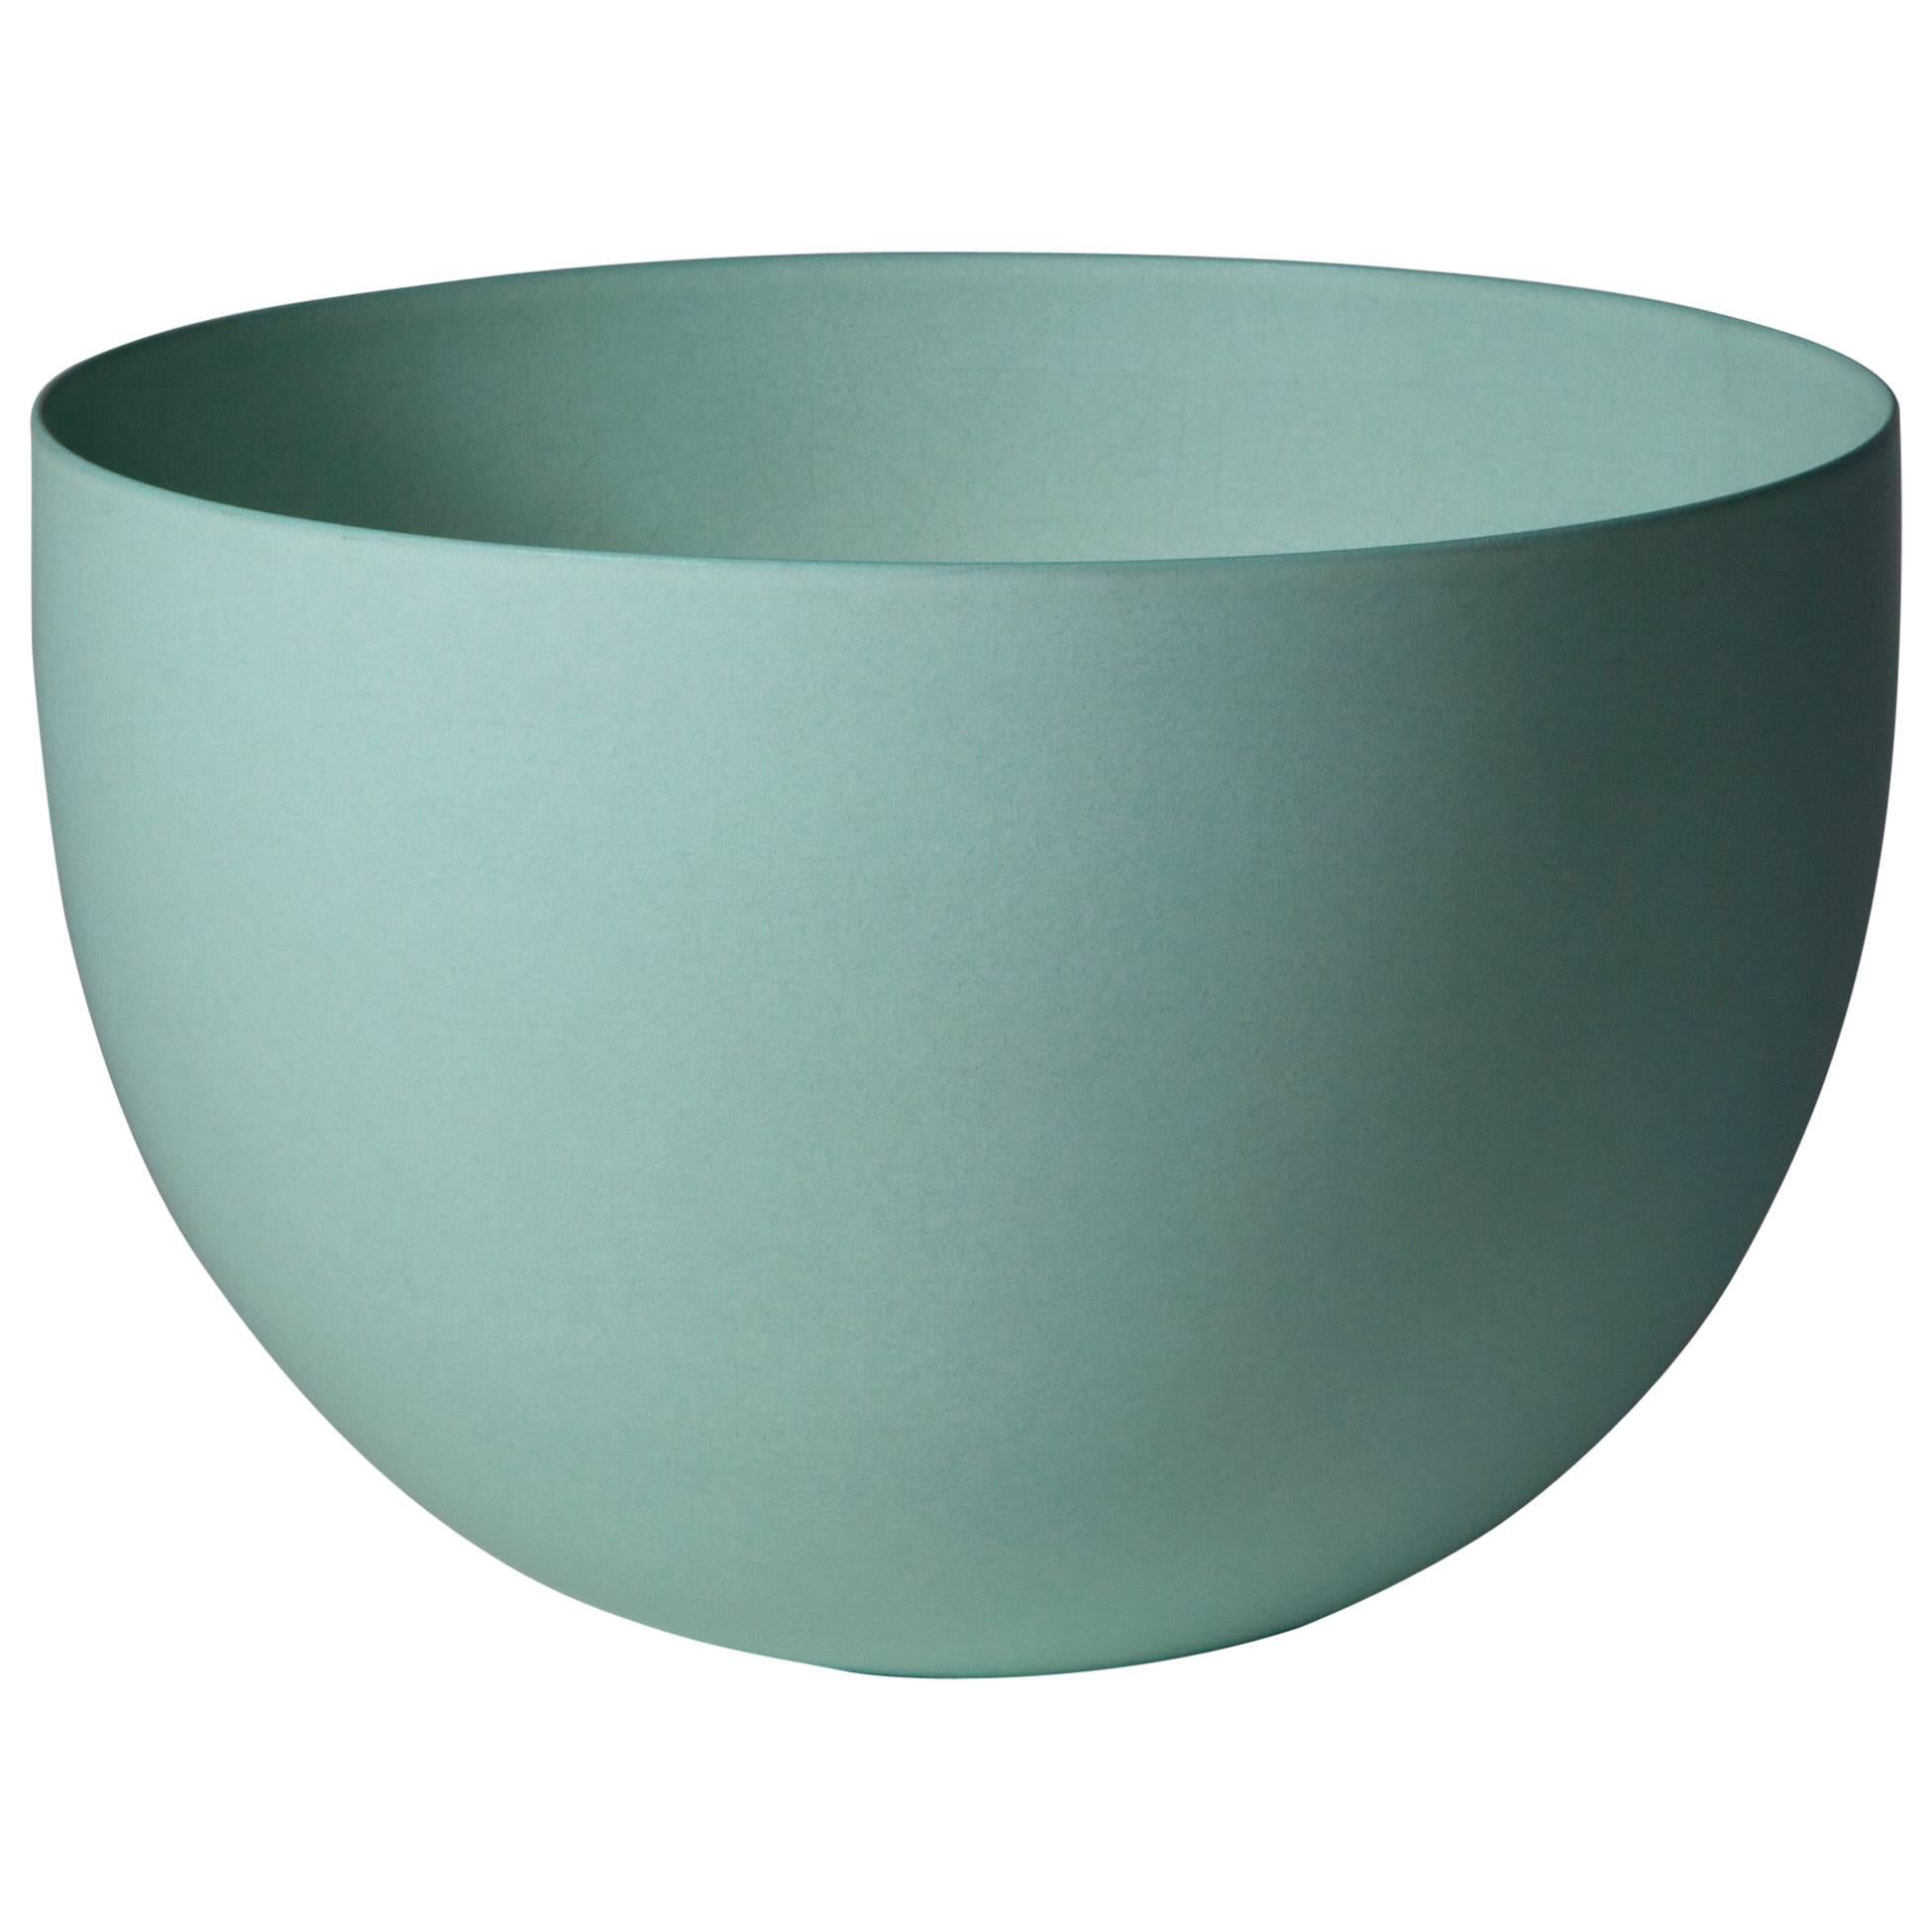 Light Green Bowl, Stoneware with Terra Sigilata Glaze, One-Off by Geert Lap For Sale